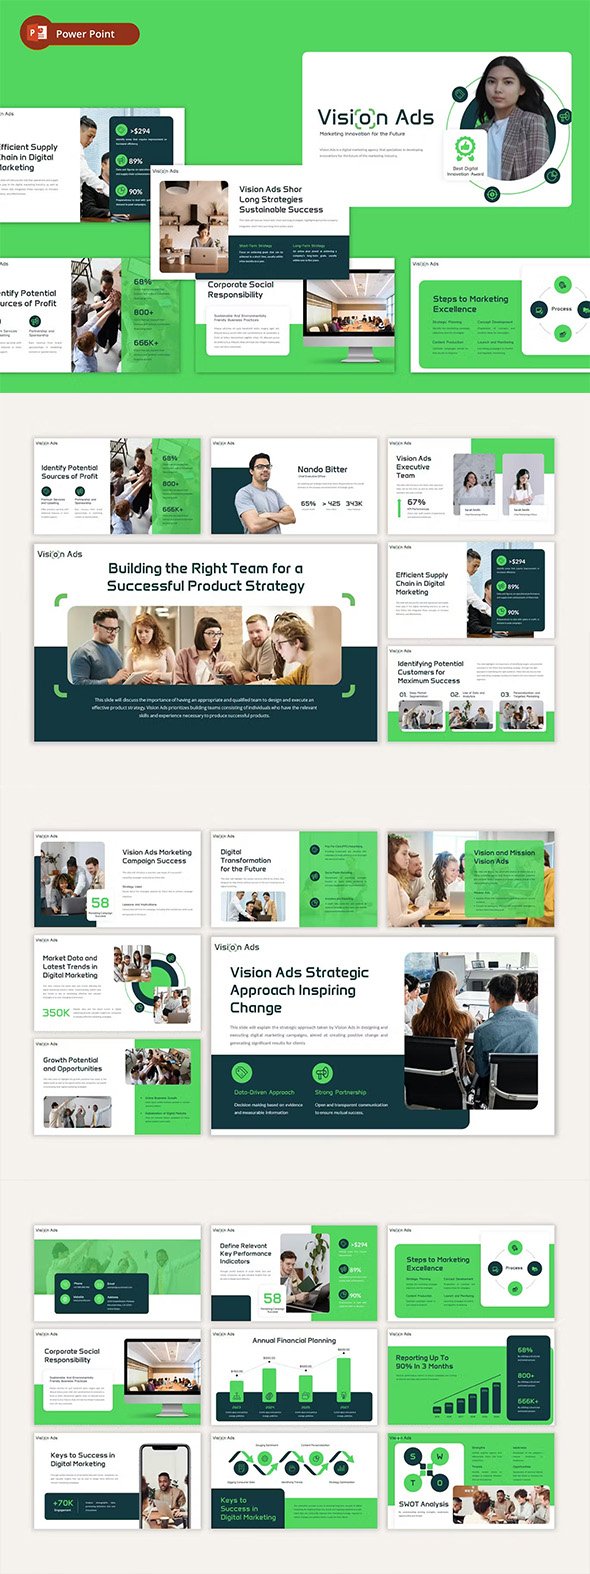 1710880875_vision-ads-digital-marketing-powerpoint-template